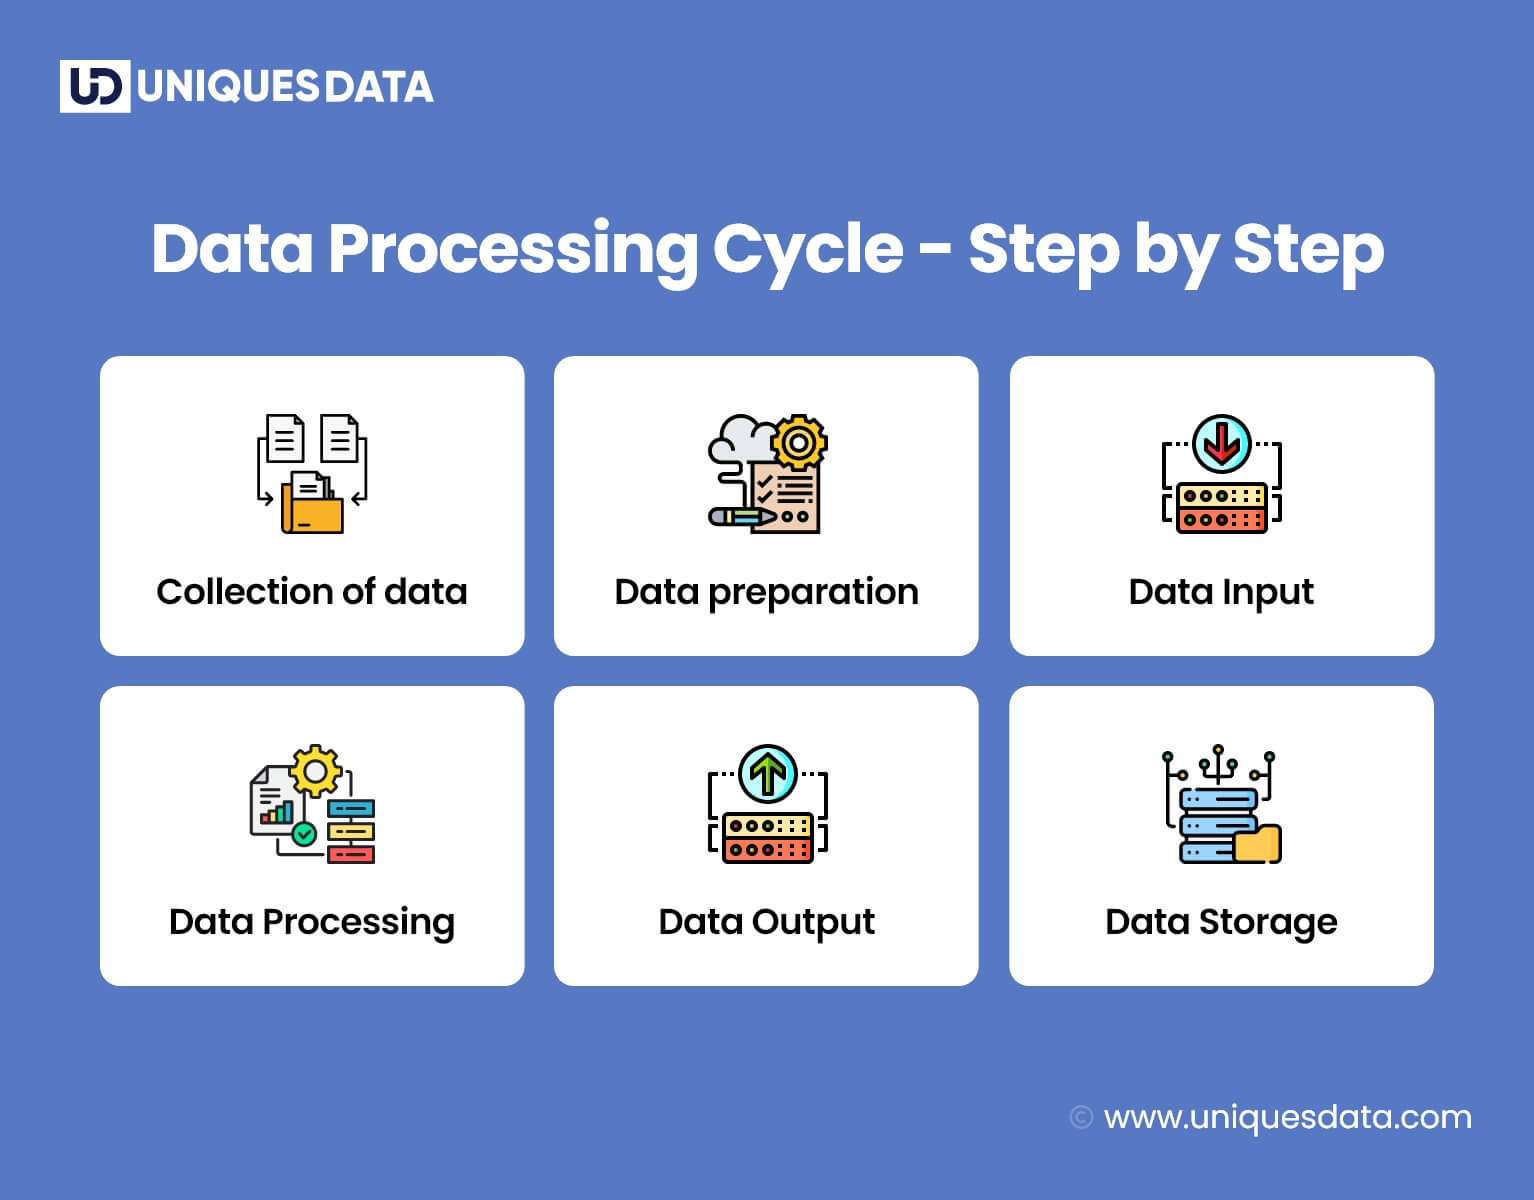 Data Processing Cycle - Step by Step